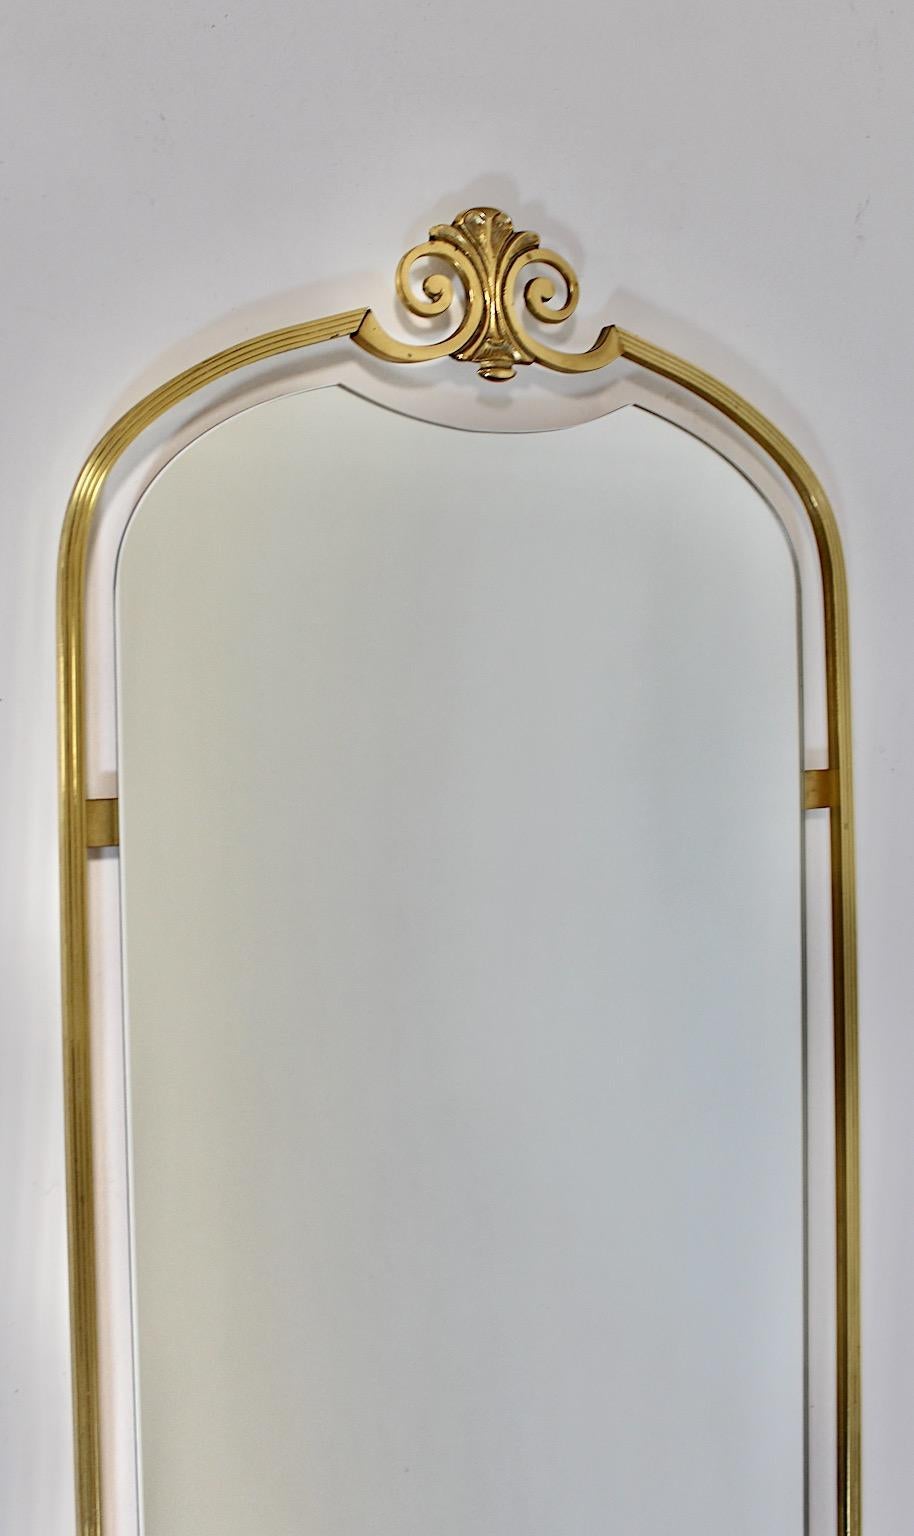 Hollywood Regency Style Modern vintage full length mirror or wall mirror from brass 1970s Italy.
An amazing Hollywood Regency Style full length mirror or wall mirror framed with brass profiles, while brass ornaments decorates the bottom and the